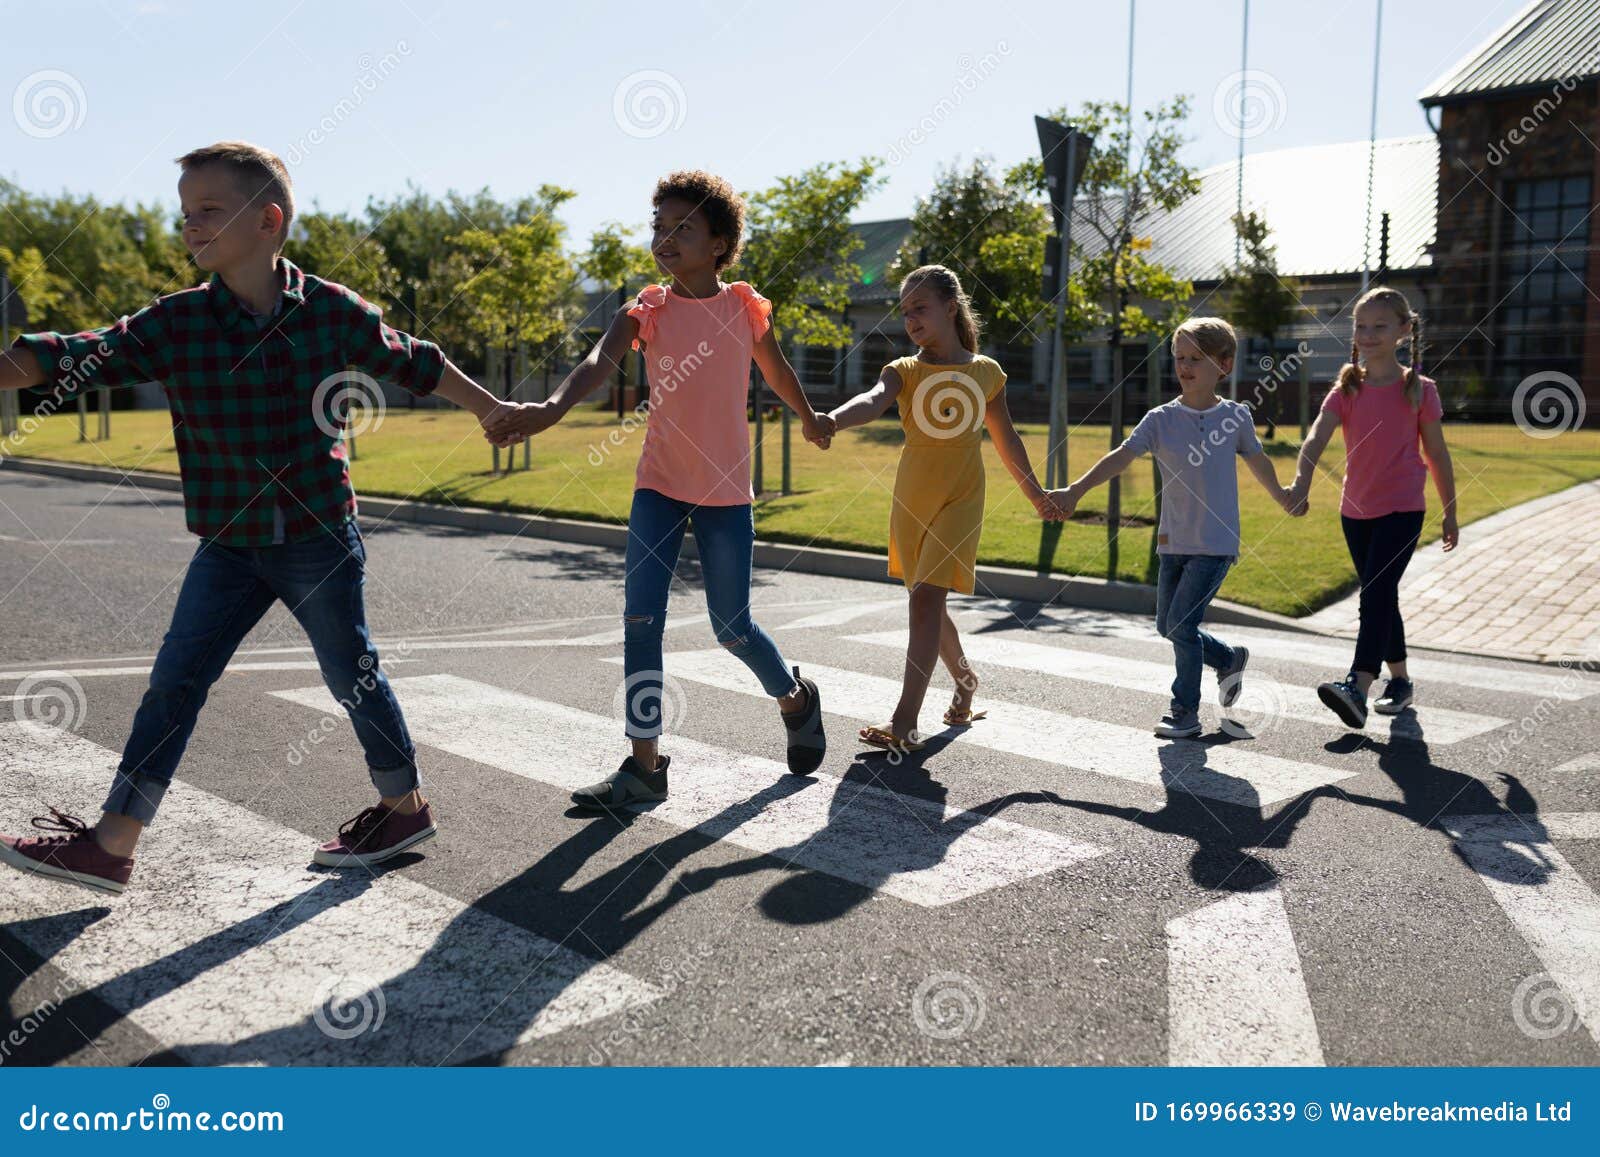 Group Of Elementary School Pupils Crossing A Road Stock Image Image